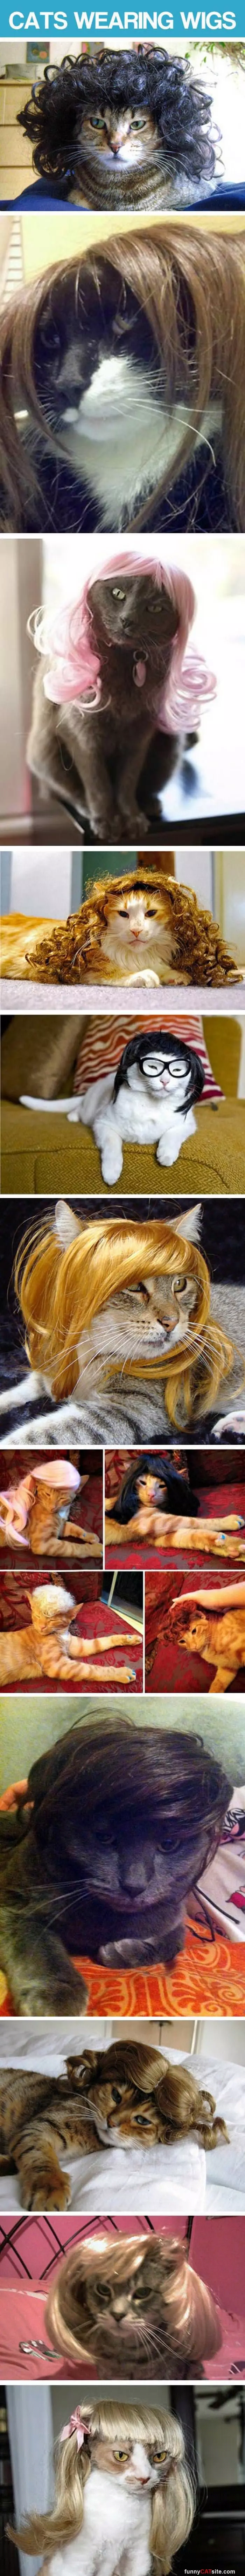 Cats With Wigs